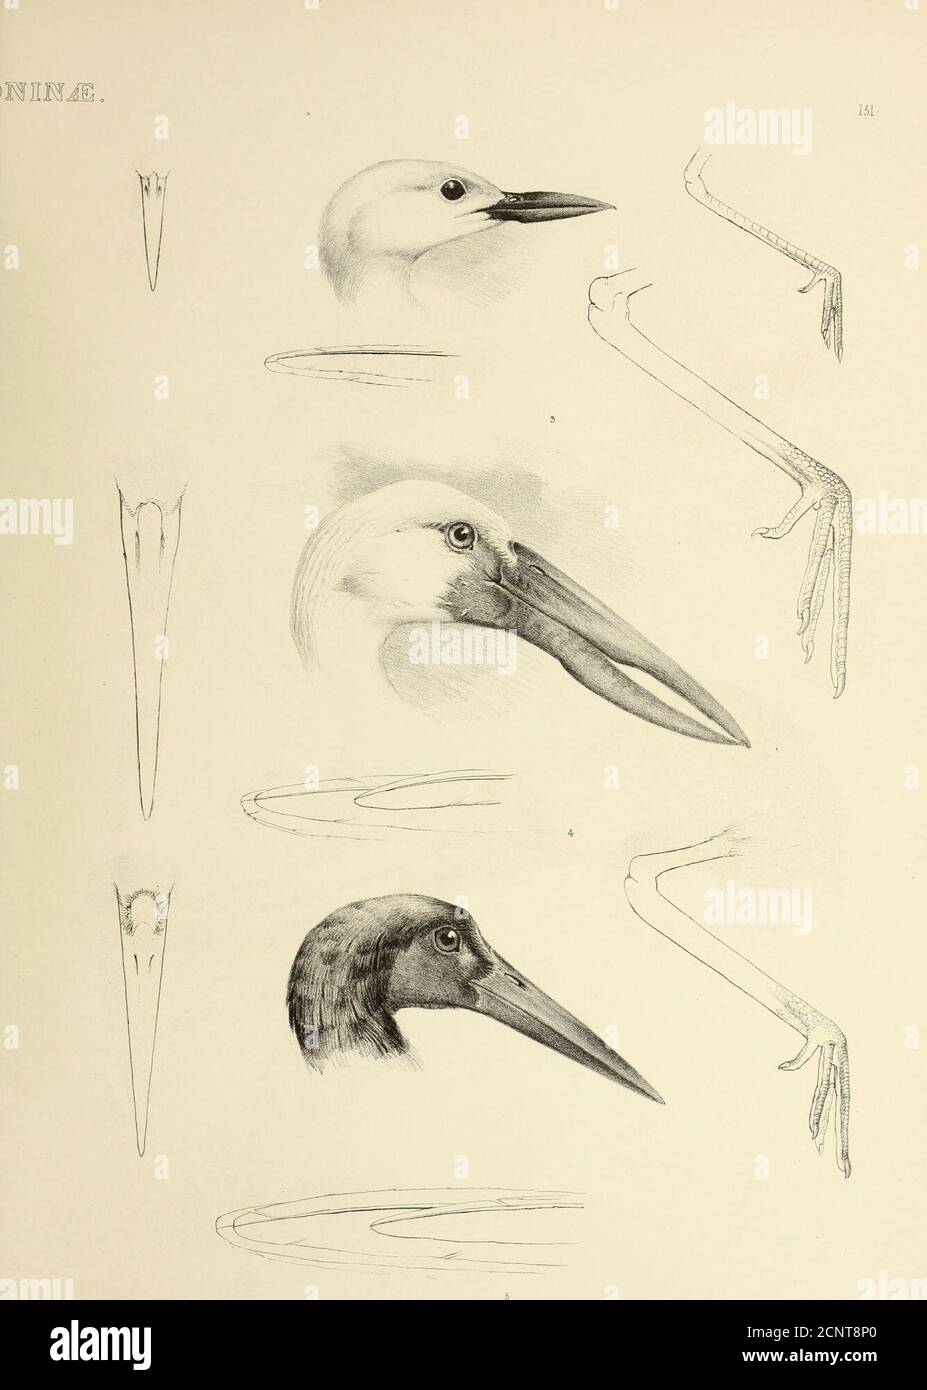 . The genera of birds : comprising their generic characters, a notice of the habits of the genus, and an extensive list of species referred to their several genera . 1.LEPT0PTILUS argala. 2. MYCTERIA. senegalensis. Printed, by HuUmimdtl Jt Walton 3 DROMAS ardeola. 4. ANAS TOM US oscLtans. 5- ClCONIA Abdimi. fkRY y/ERSlTYslA USA Order II. GRALL/E. Family II. Aiweidje. The fifth Subfamily, TANTALINiE, or Ibises, have the Bill lengthened, more or less slender, and curved throughout its length; the sides graduallycompressed to the tip, which is obtuse; the Nostrils lateral, and sometimes placed in Stock Photo